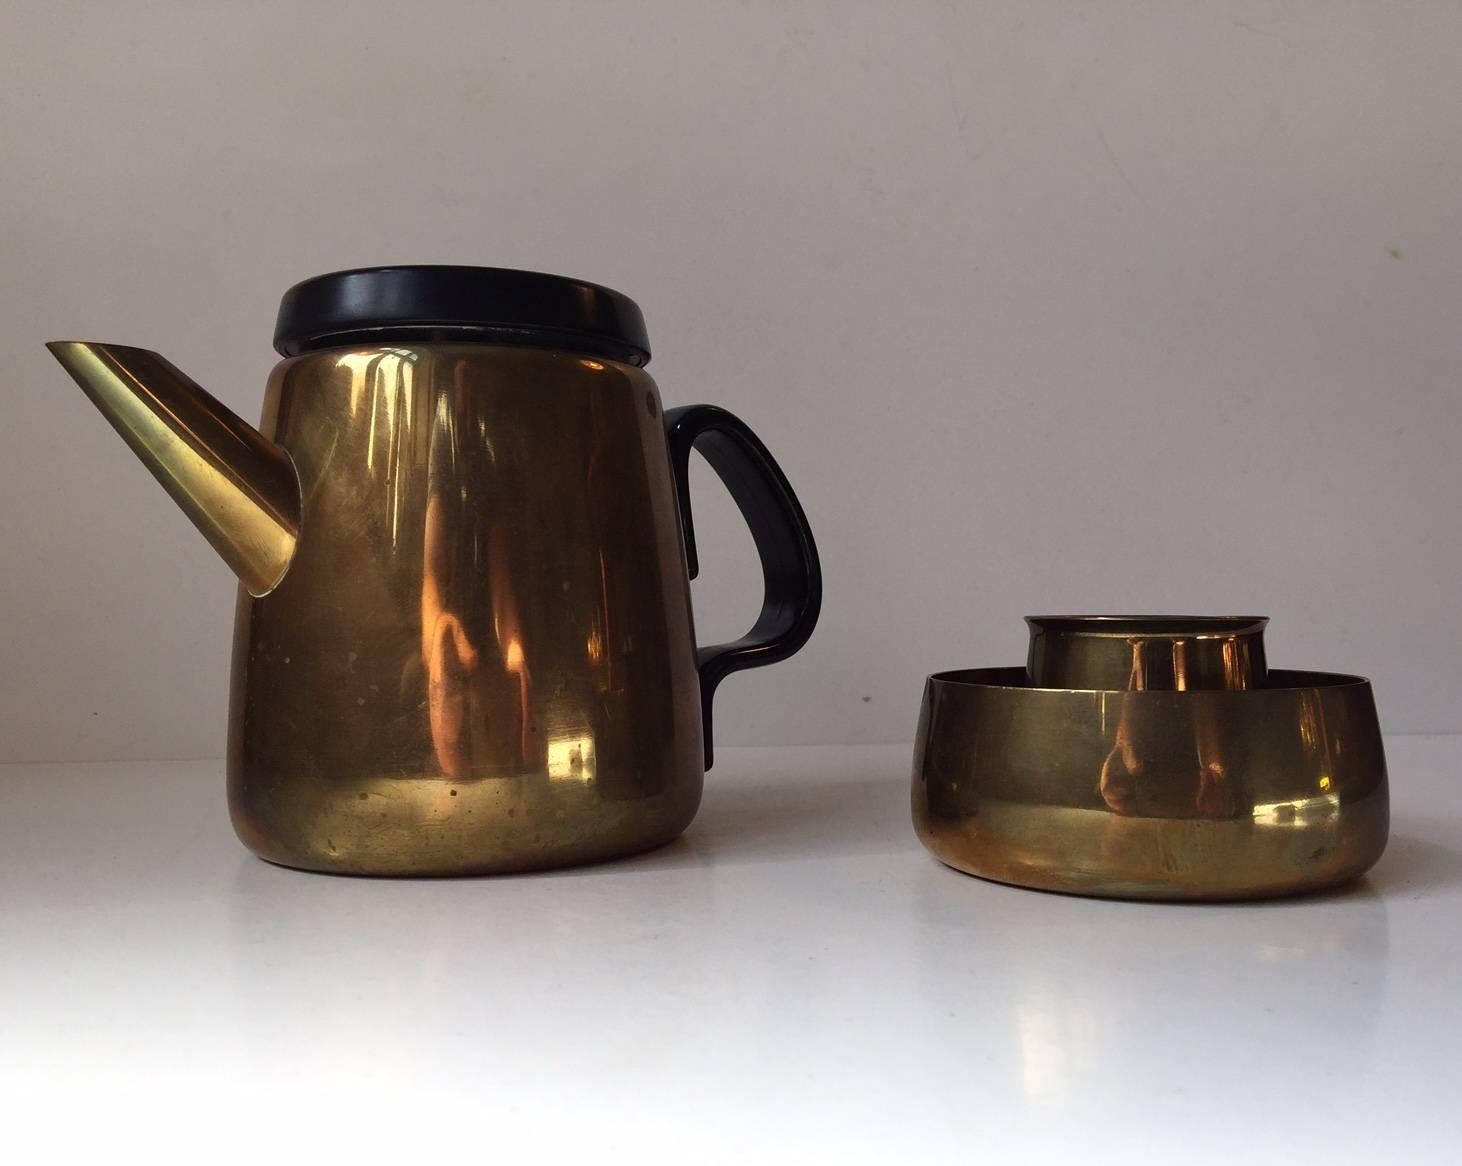 This spectacular Danish modern 3-piece brass tea or Mocaa set is designed Danish Architect and Silversmith Henning Koppel and manufactured by Georg Jensen in Denmark during the 1950s. Its simplicity at its best! It's in great vintage condition with